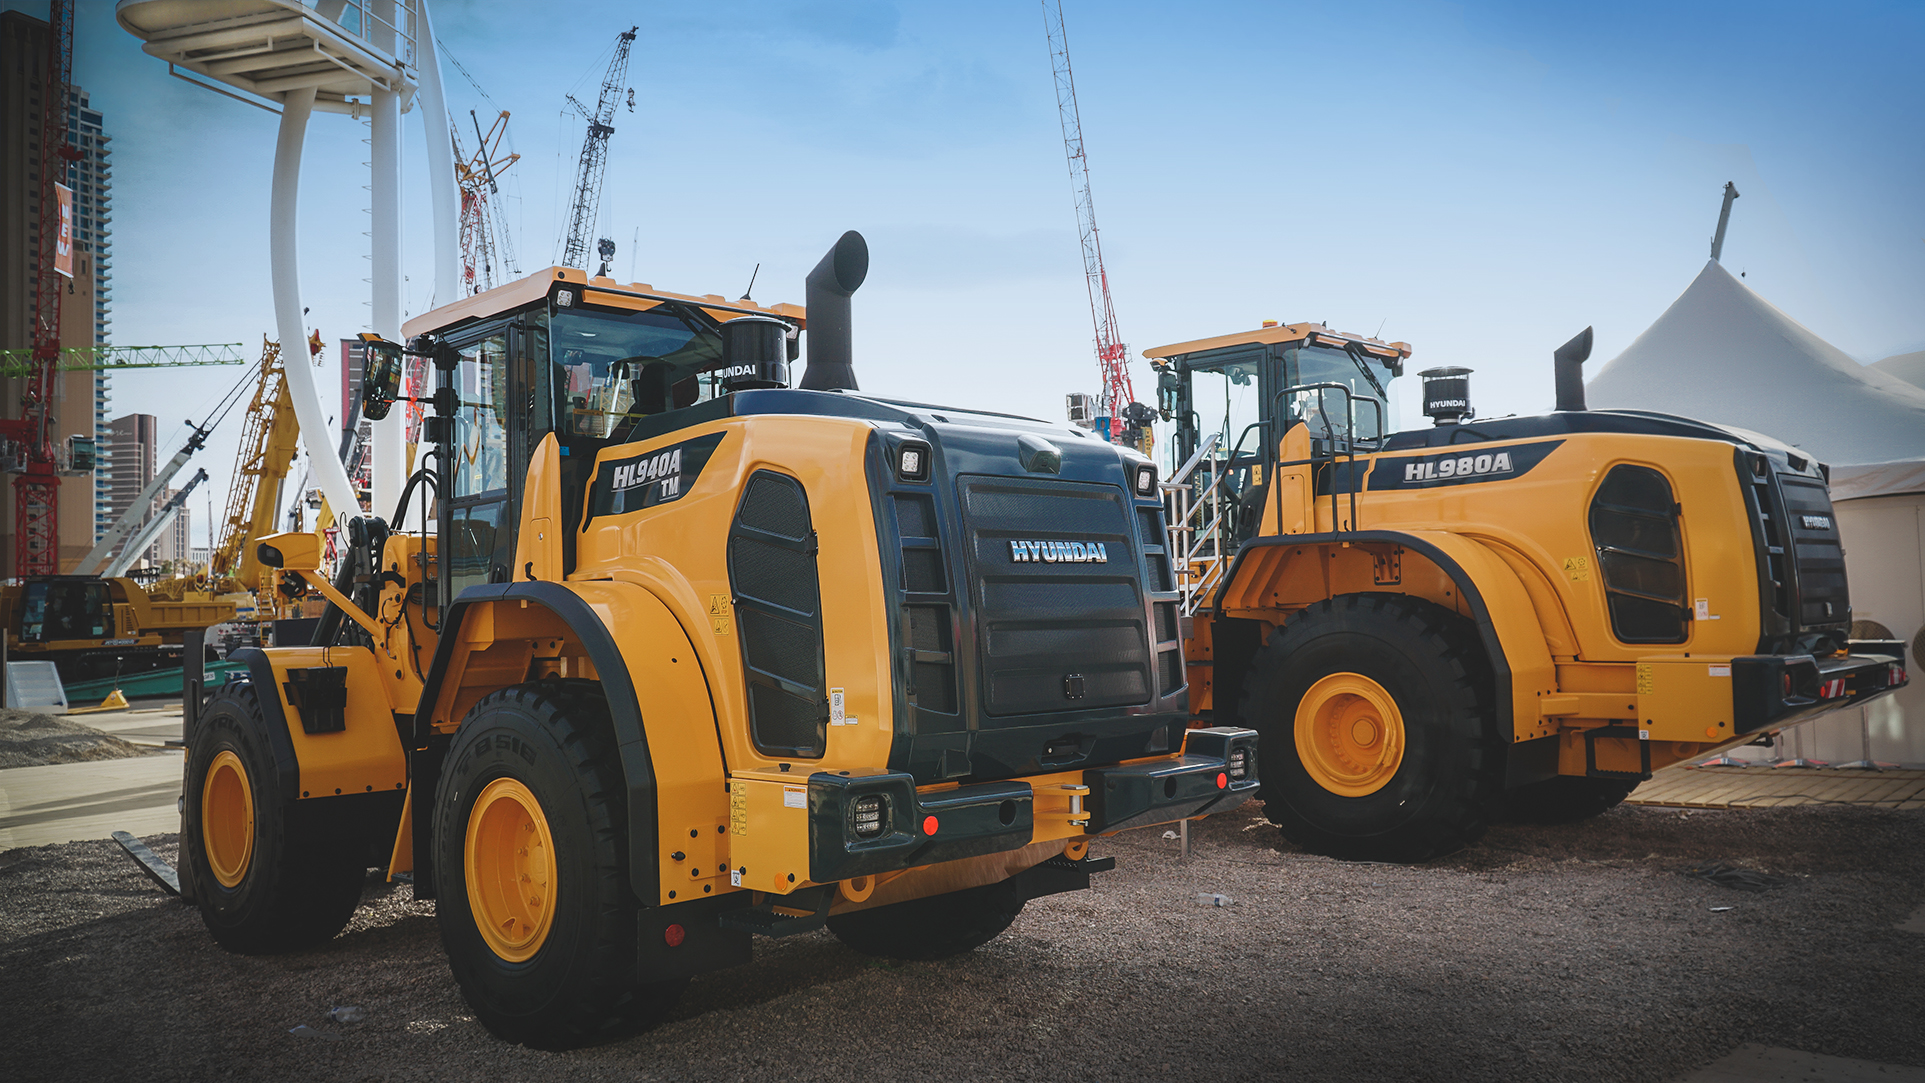 Hyundai Launches A Series Wheel Loaders, Introduces Smaller HL930A, Adds  CVT to HL975 Model At ConExpo-Con/Agg - Hyundai Construction Equipment  Americas,